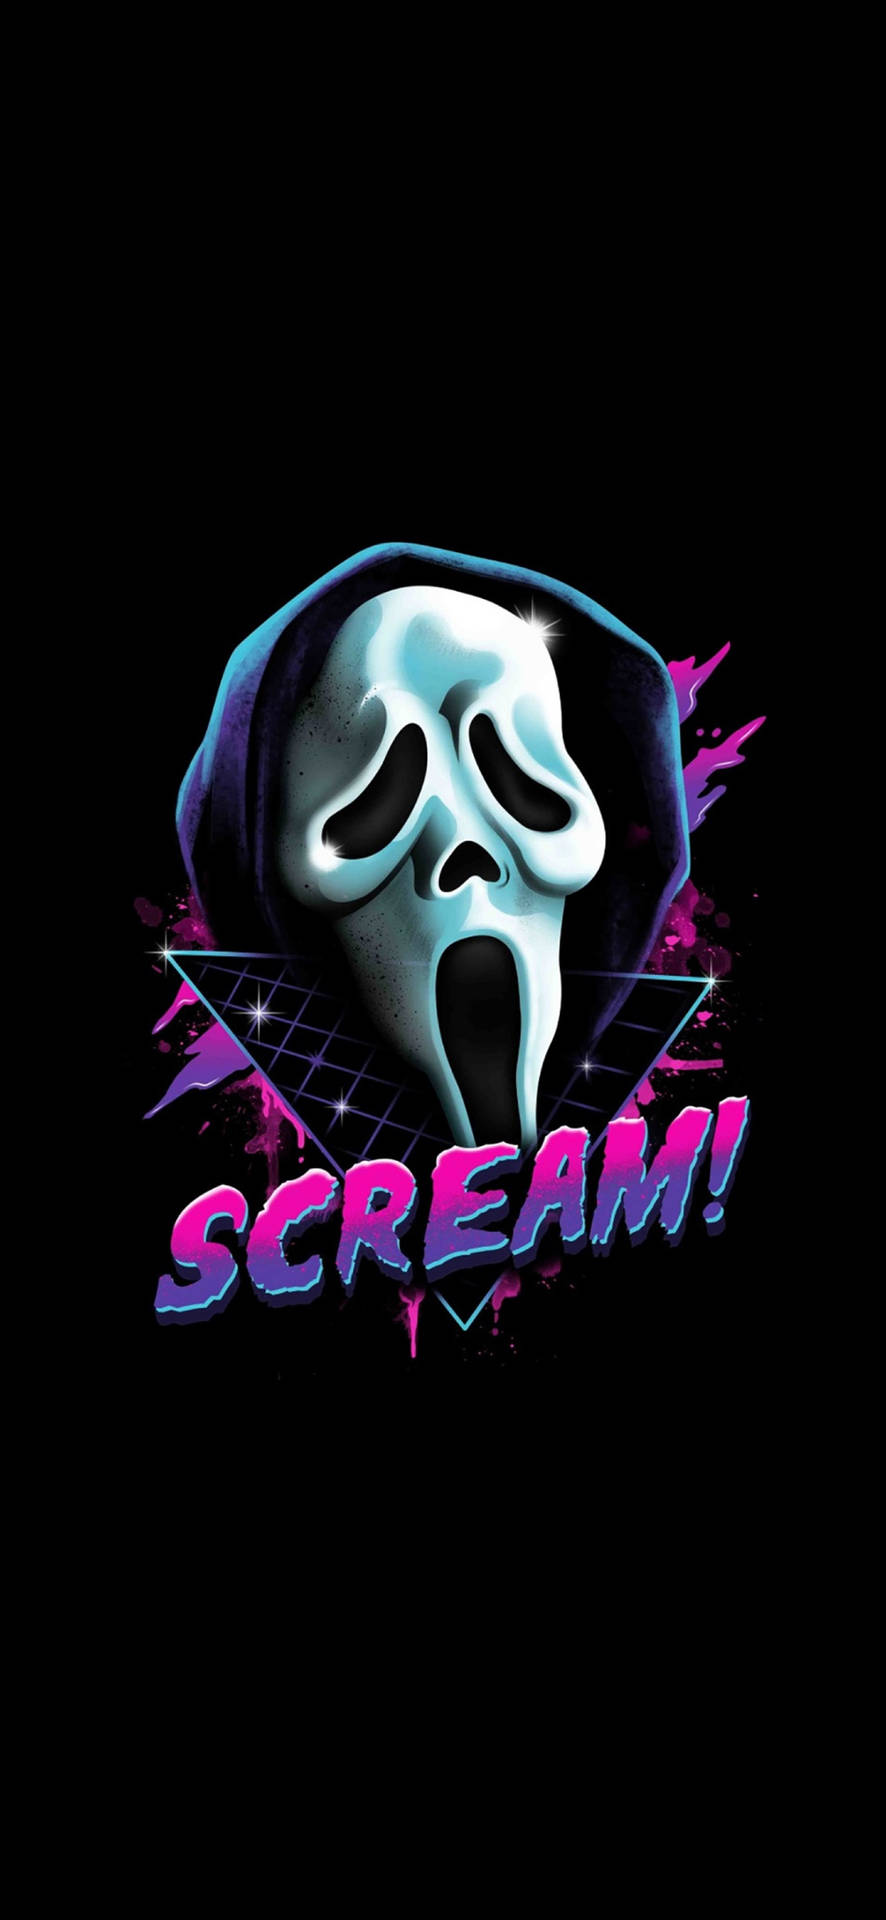 ghostface wallpaper aesthetic  Ghostface wallpaper aesthetic Scary  movie characters Halloween wallpaper backgrounds